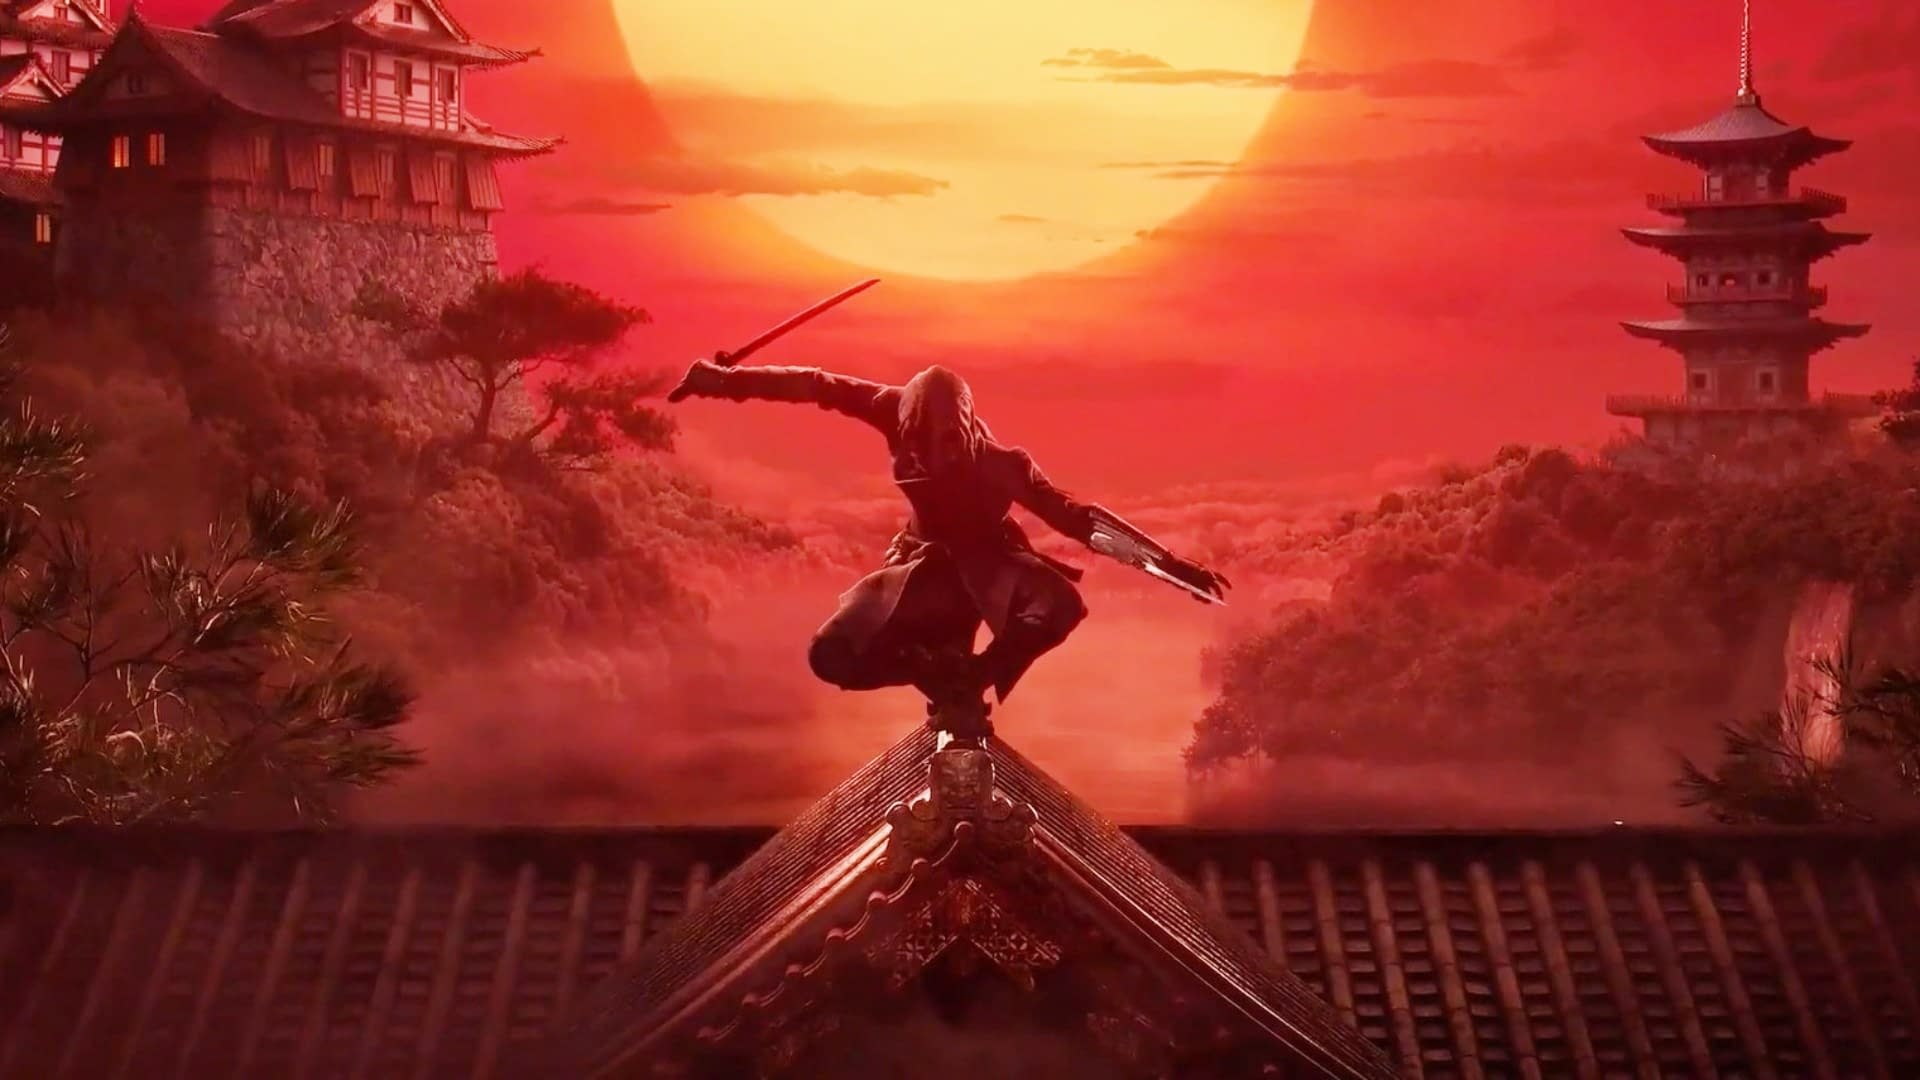 Assassin’s Creed Red code will be both samuray and ninja in the game